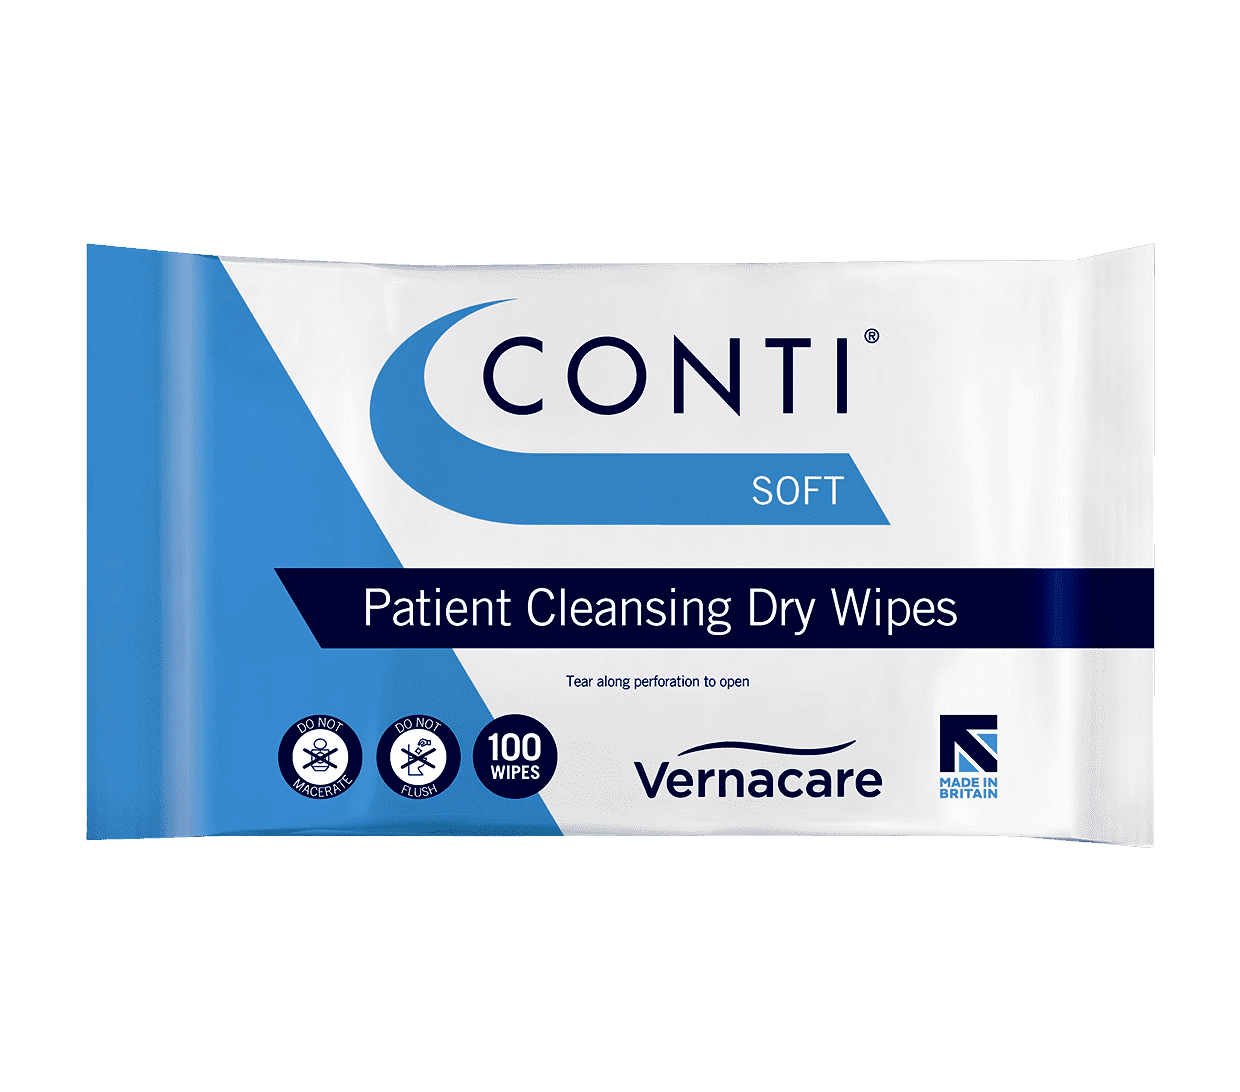 Patient dry wipes that combine softness and absorbency with a more ‘textile’ feel. Perfect for everyday patient cleansing needs and soft enough for use on fragile and sensitive skin where discomfort is an issue.